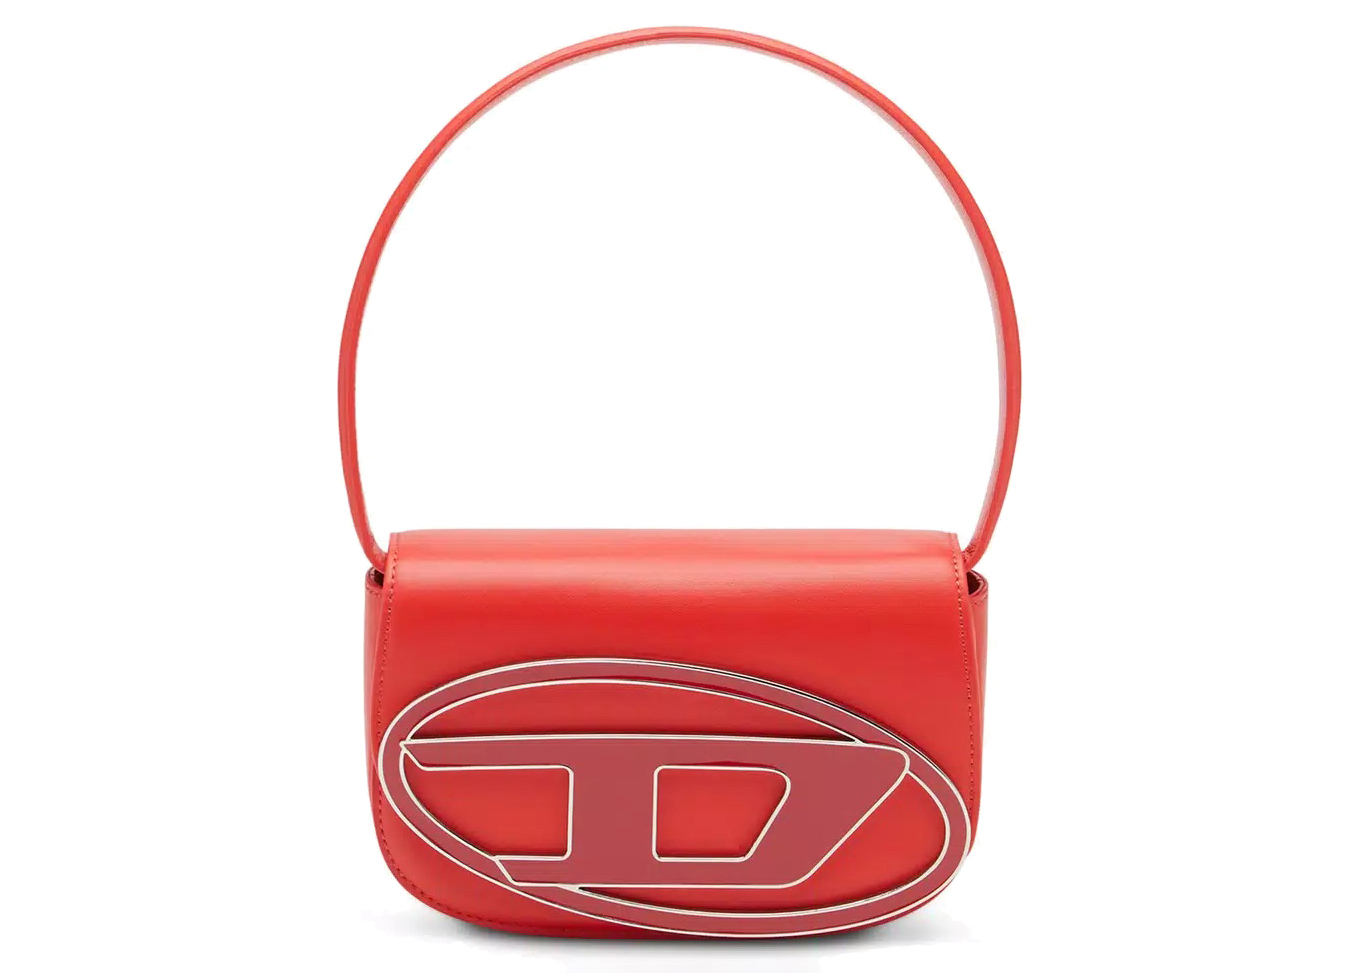 Diesel 1DR Shoulder Bag Nappa Leather Red in Nappa Leather with ...